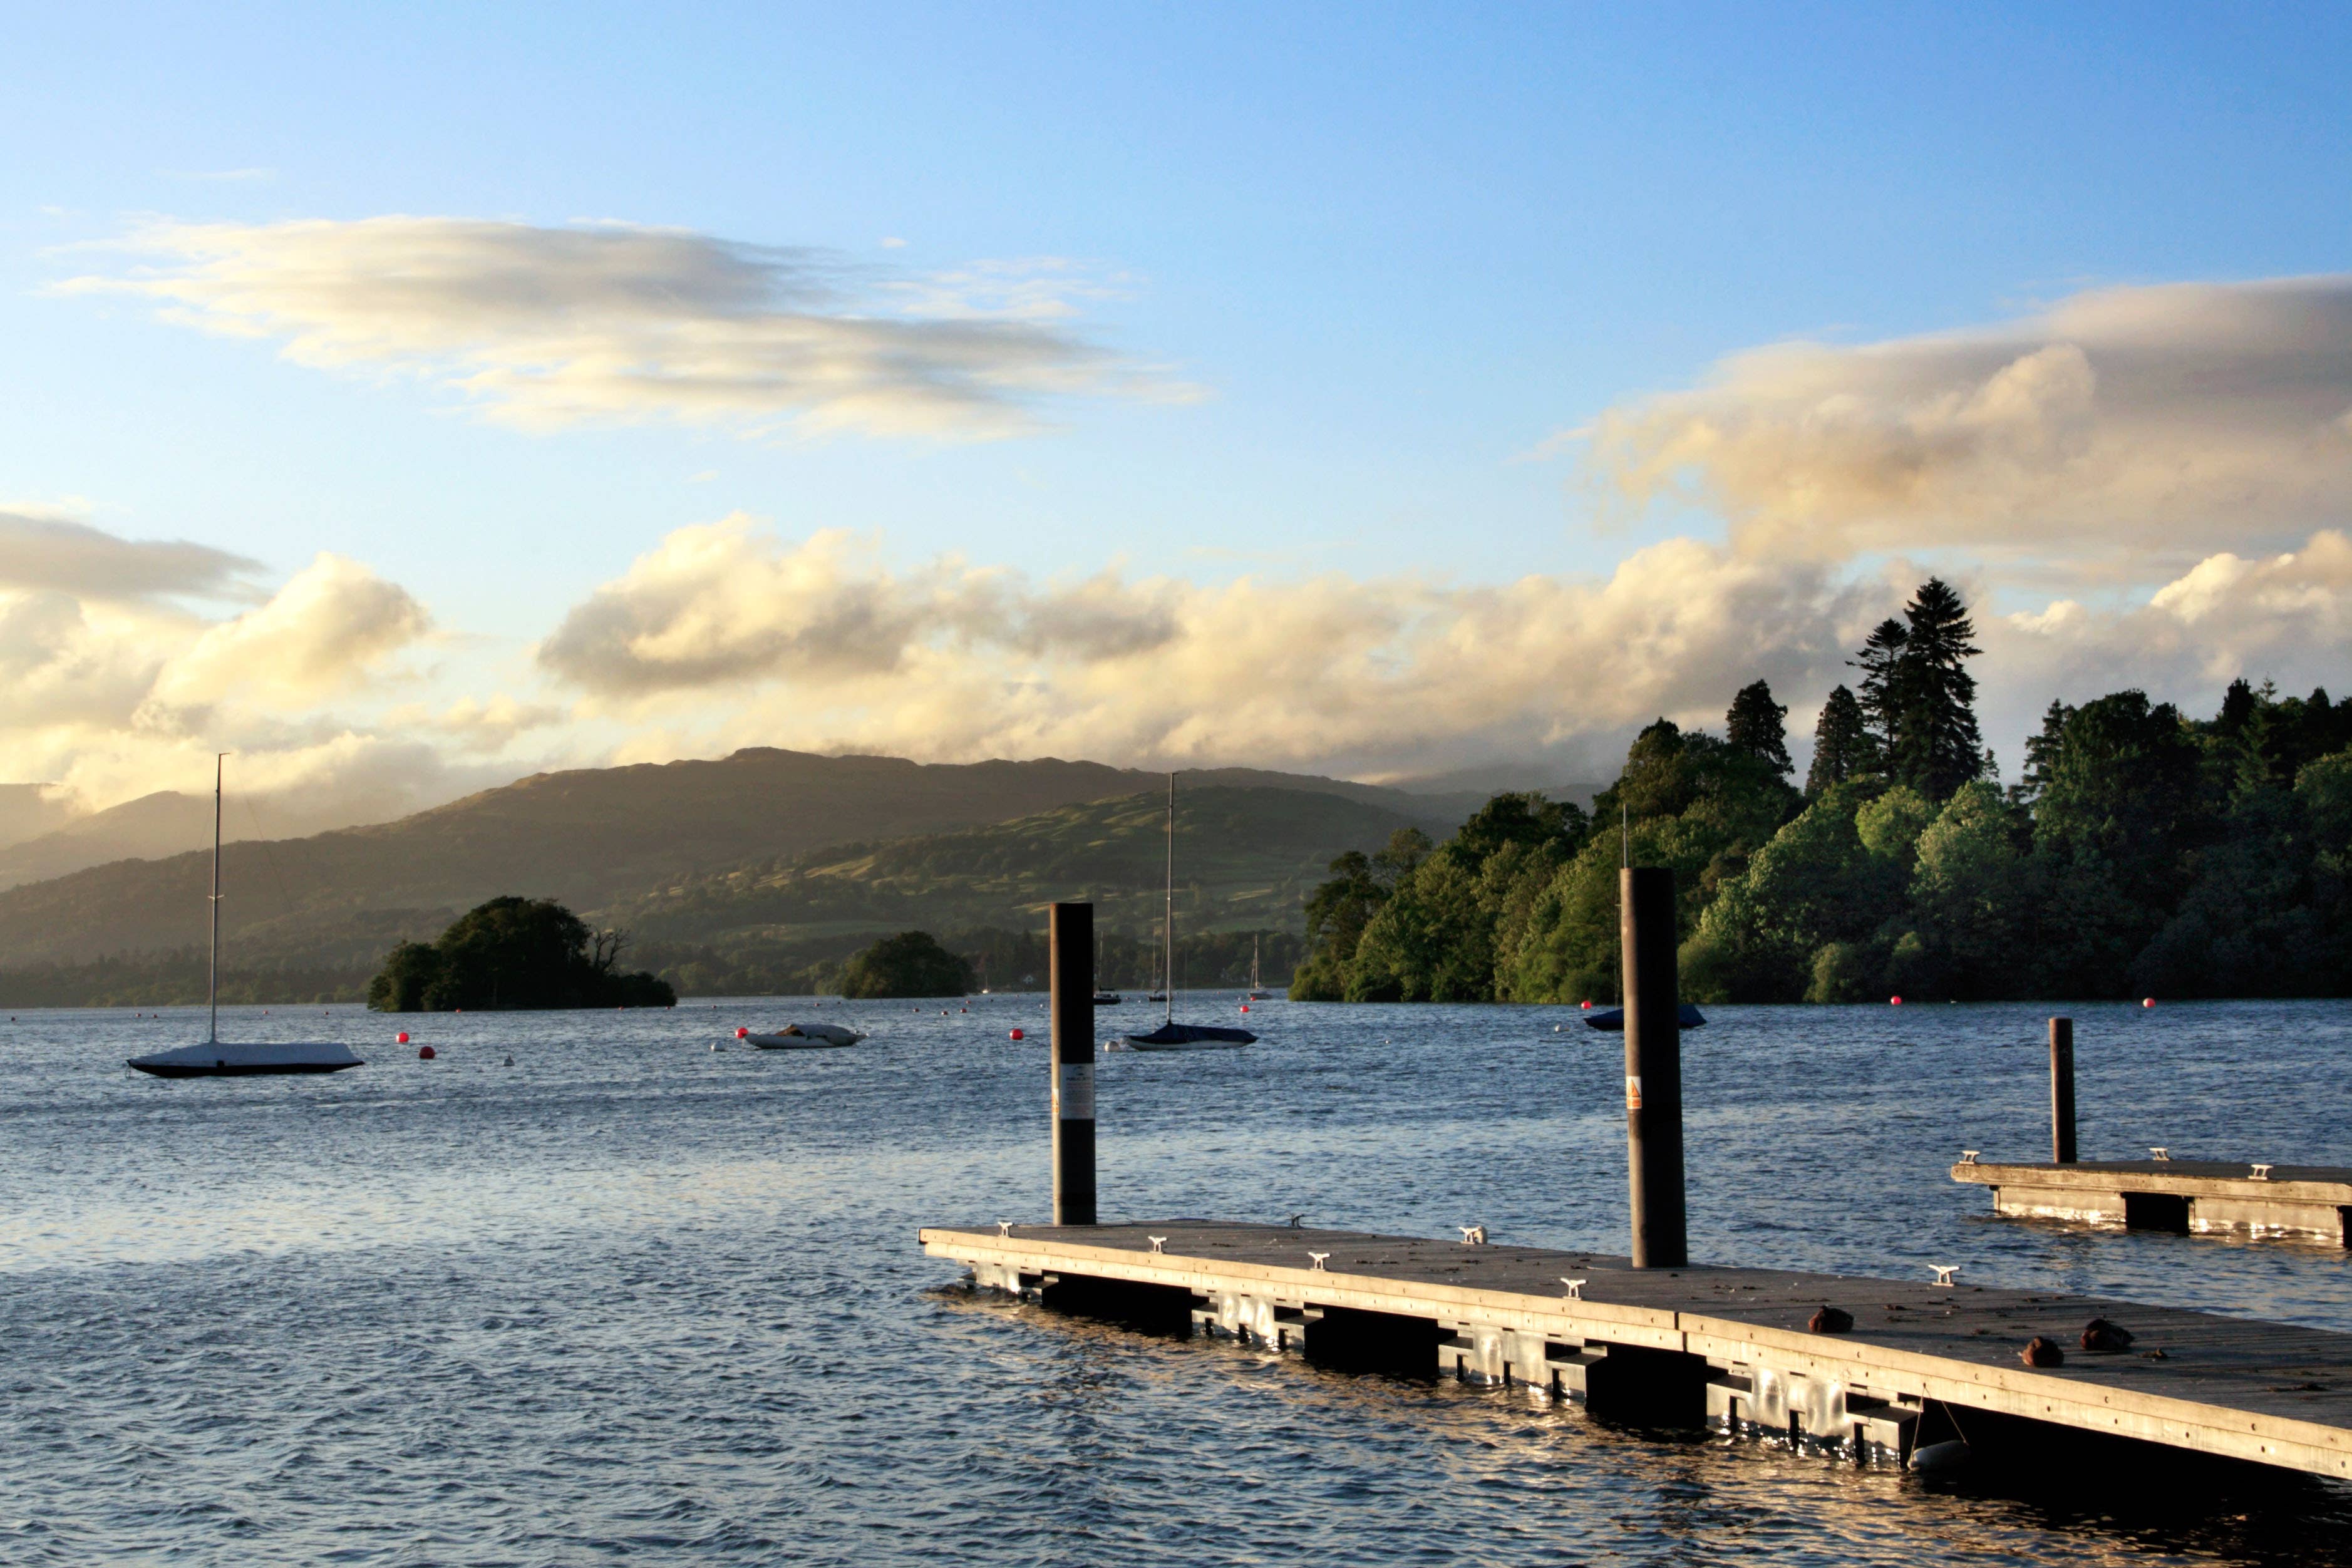 lake windermere, united utilities, sewage, pollution, sewage alerts across uk mapped after ‘millions’ of litres dumped into lake windermere beauty spot